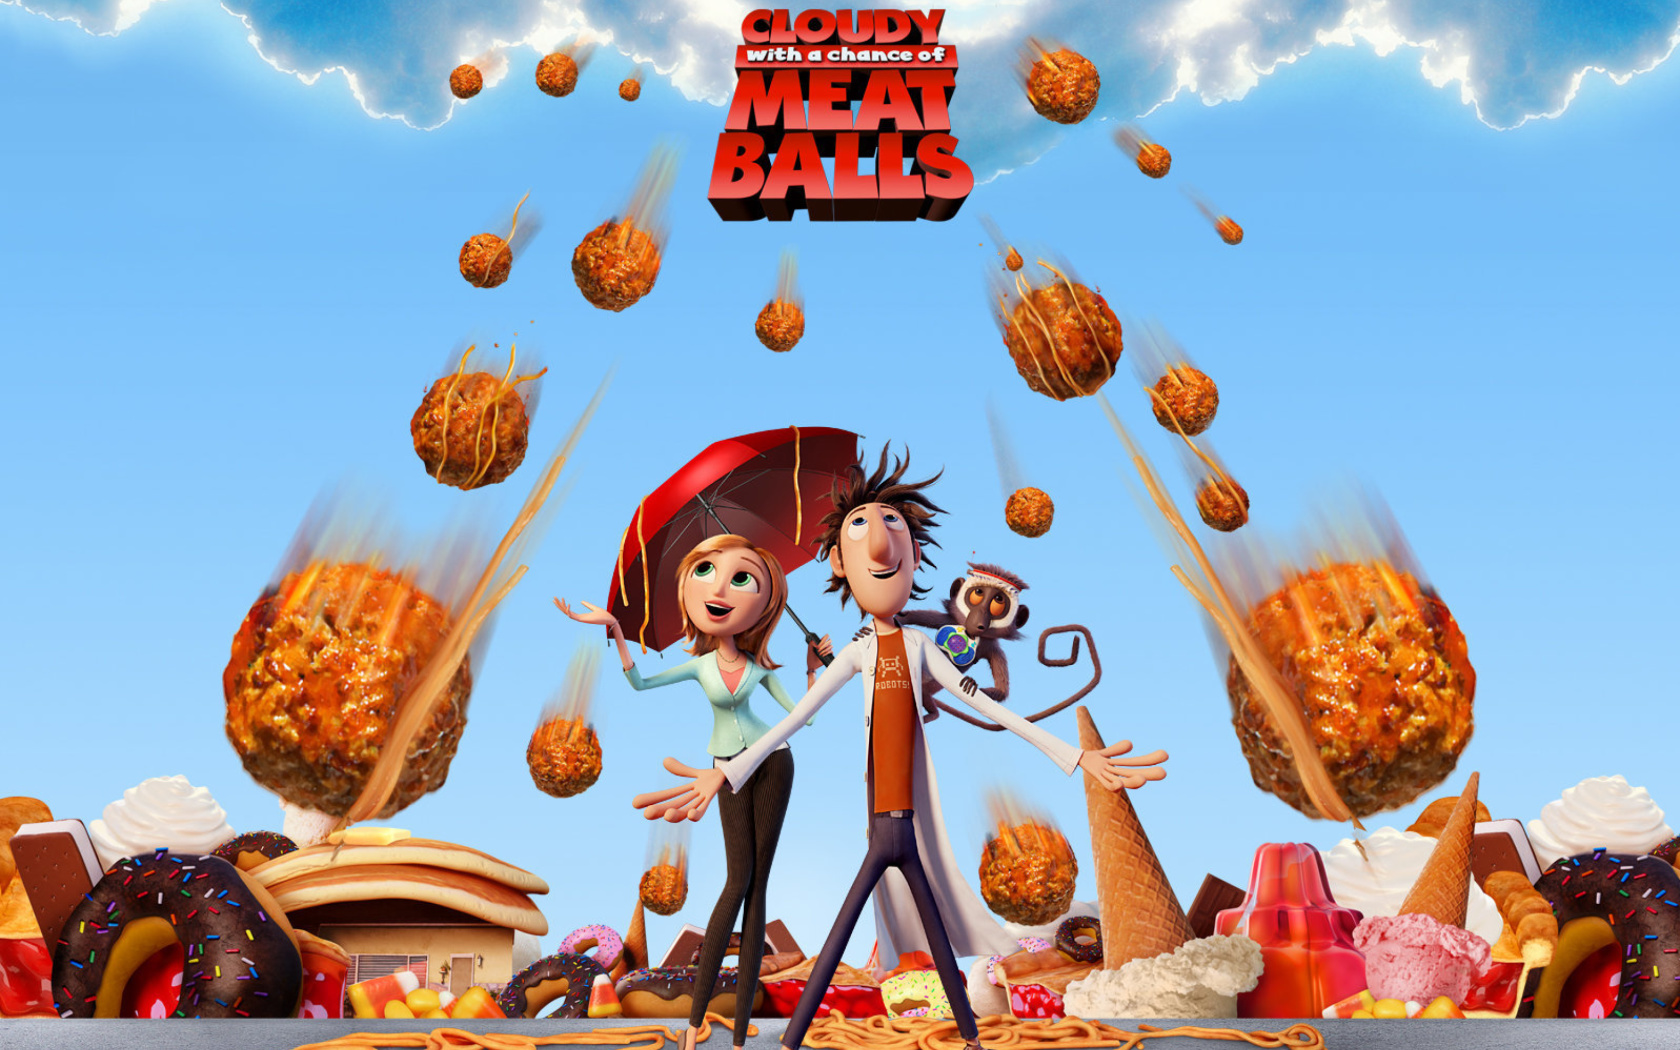 Sfondi Cloudy with a Chance of Meatballs 1680x1050